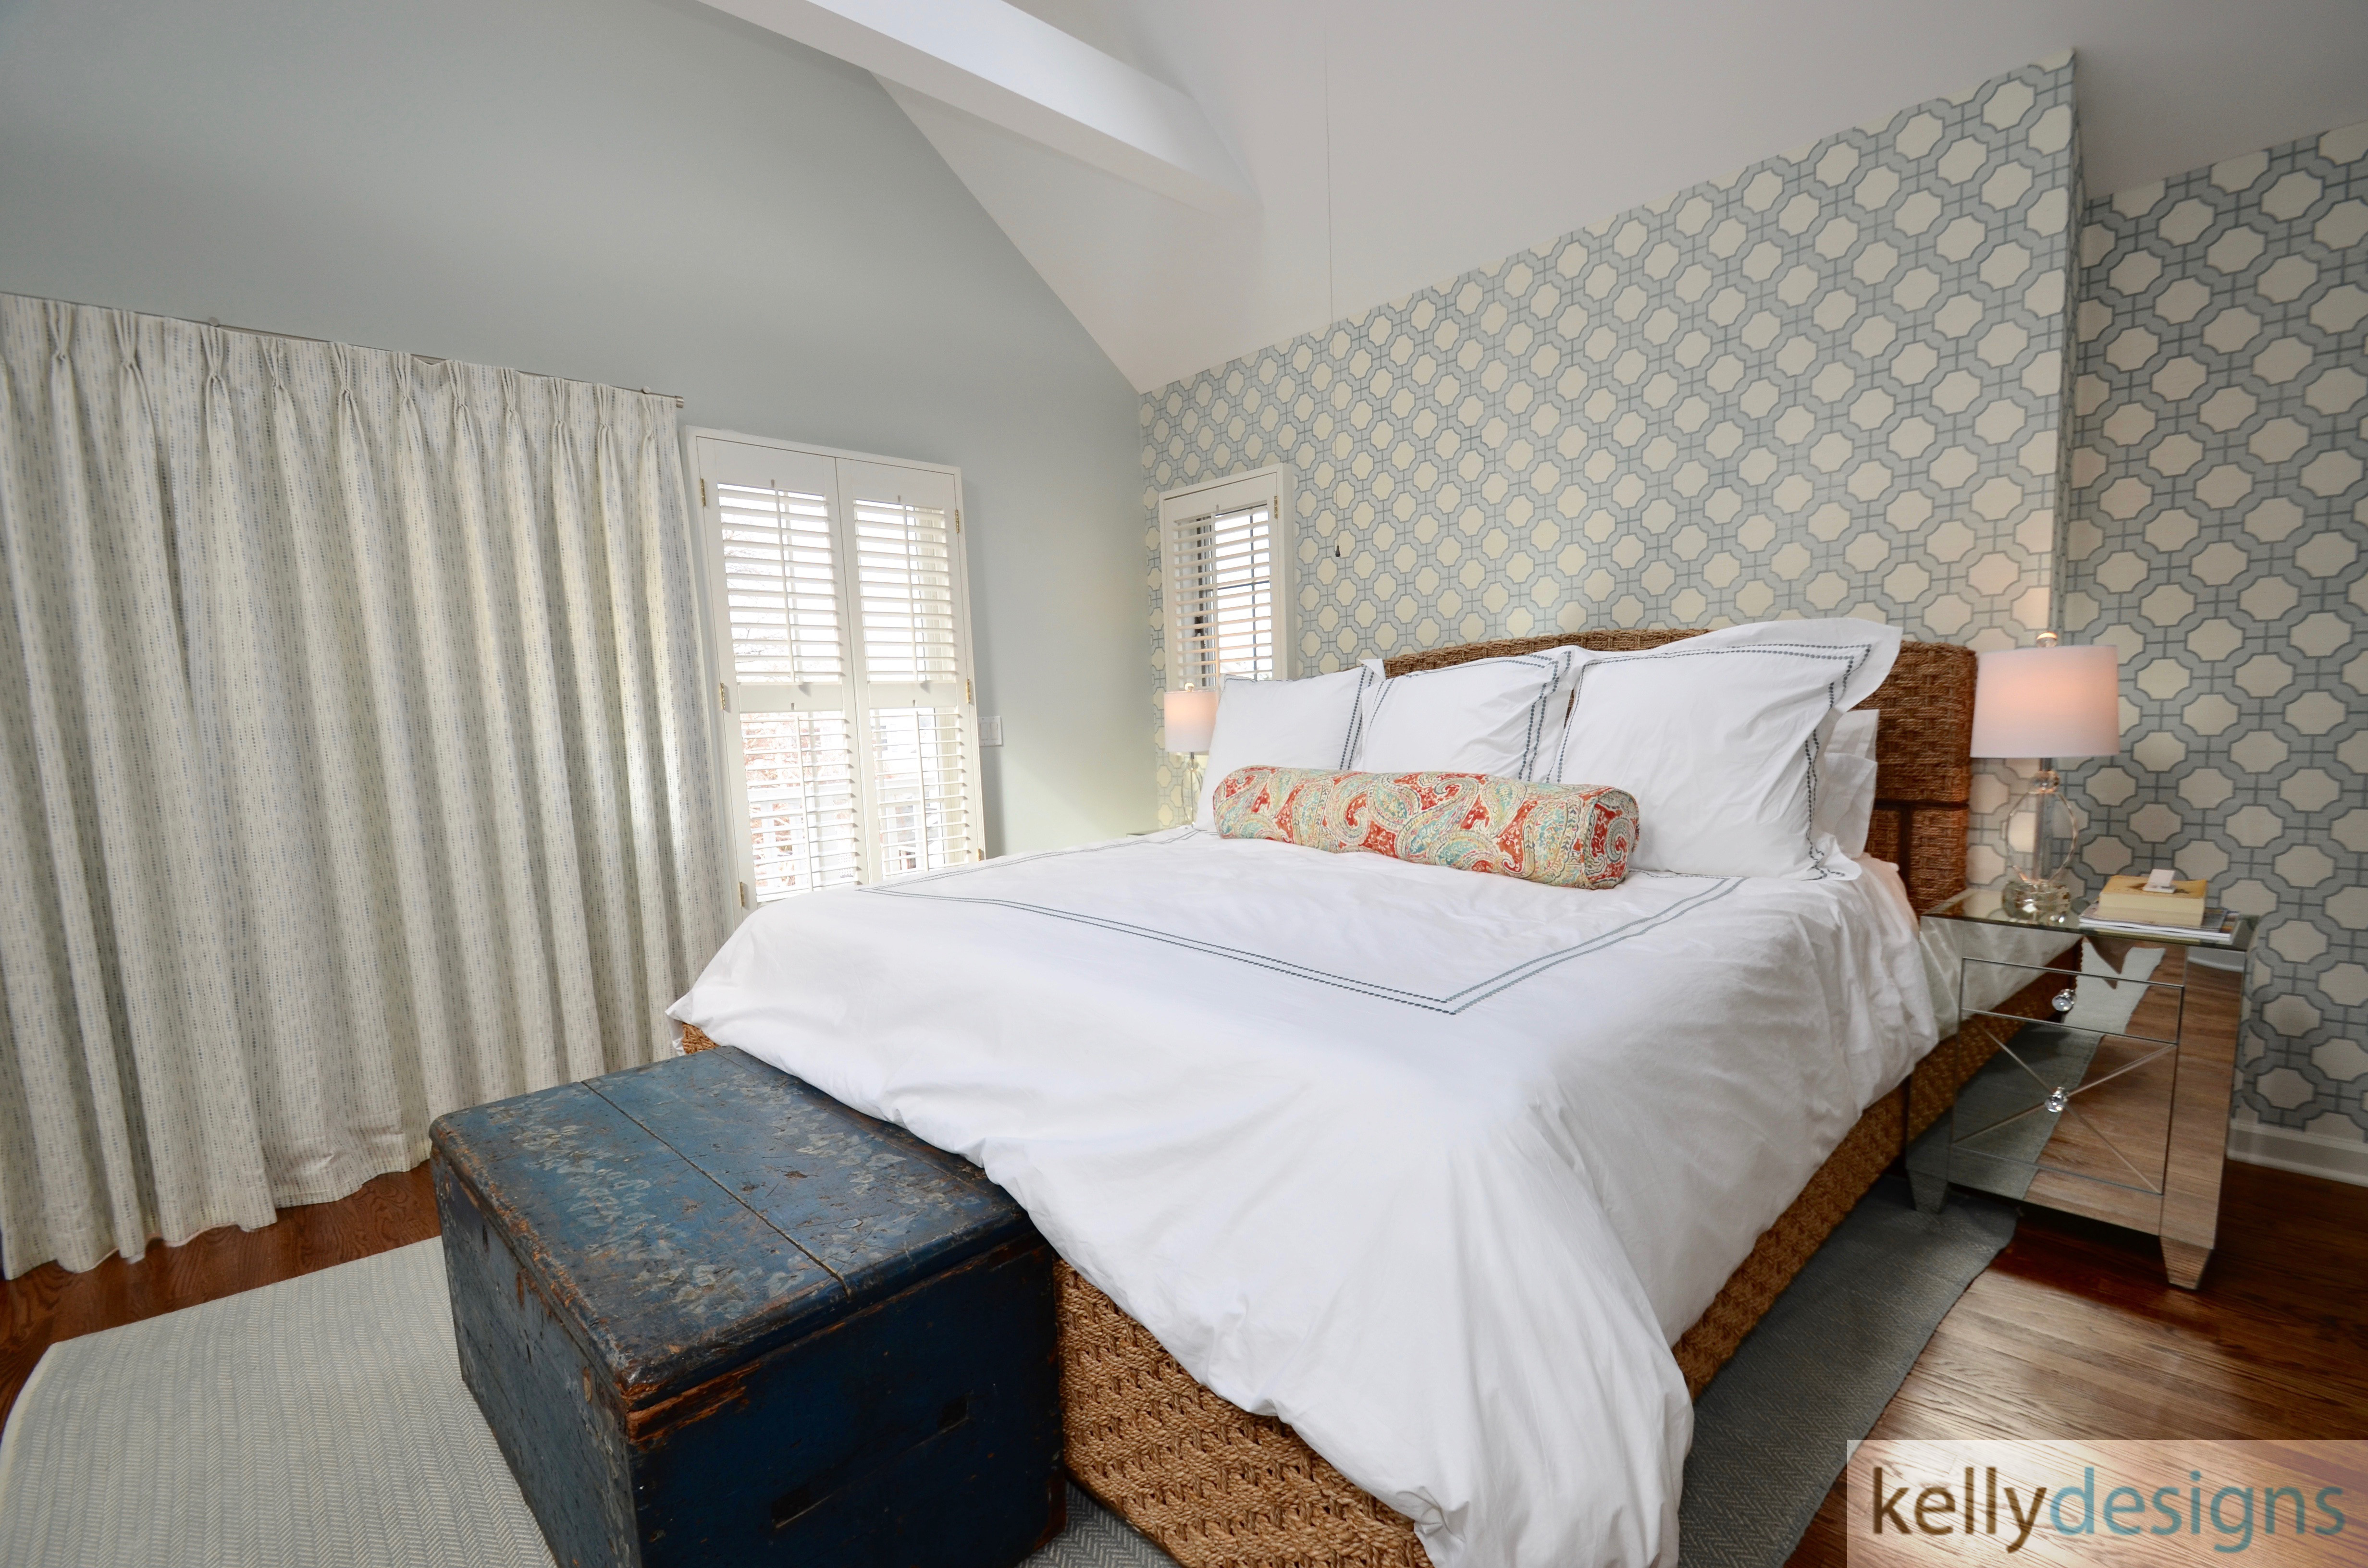 Adding some fabulous wallpaper from Philip Jefferies makes this Master Bedroom a knockout